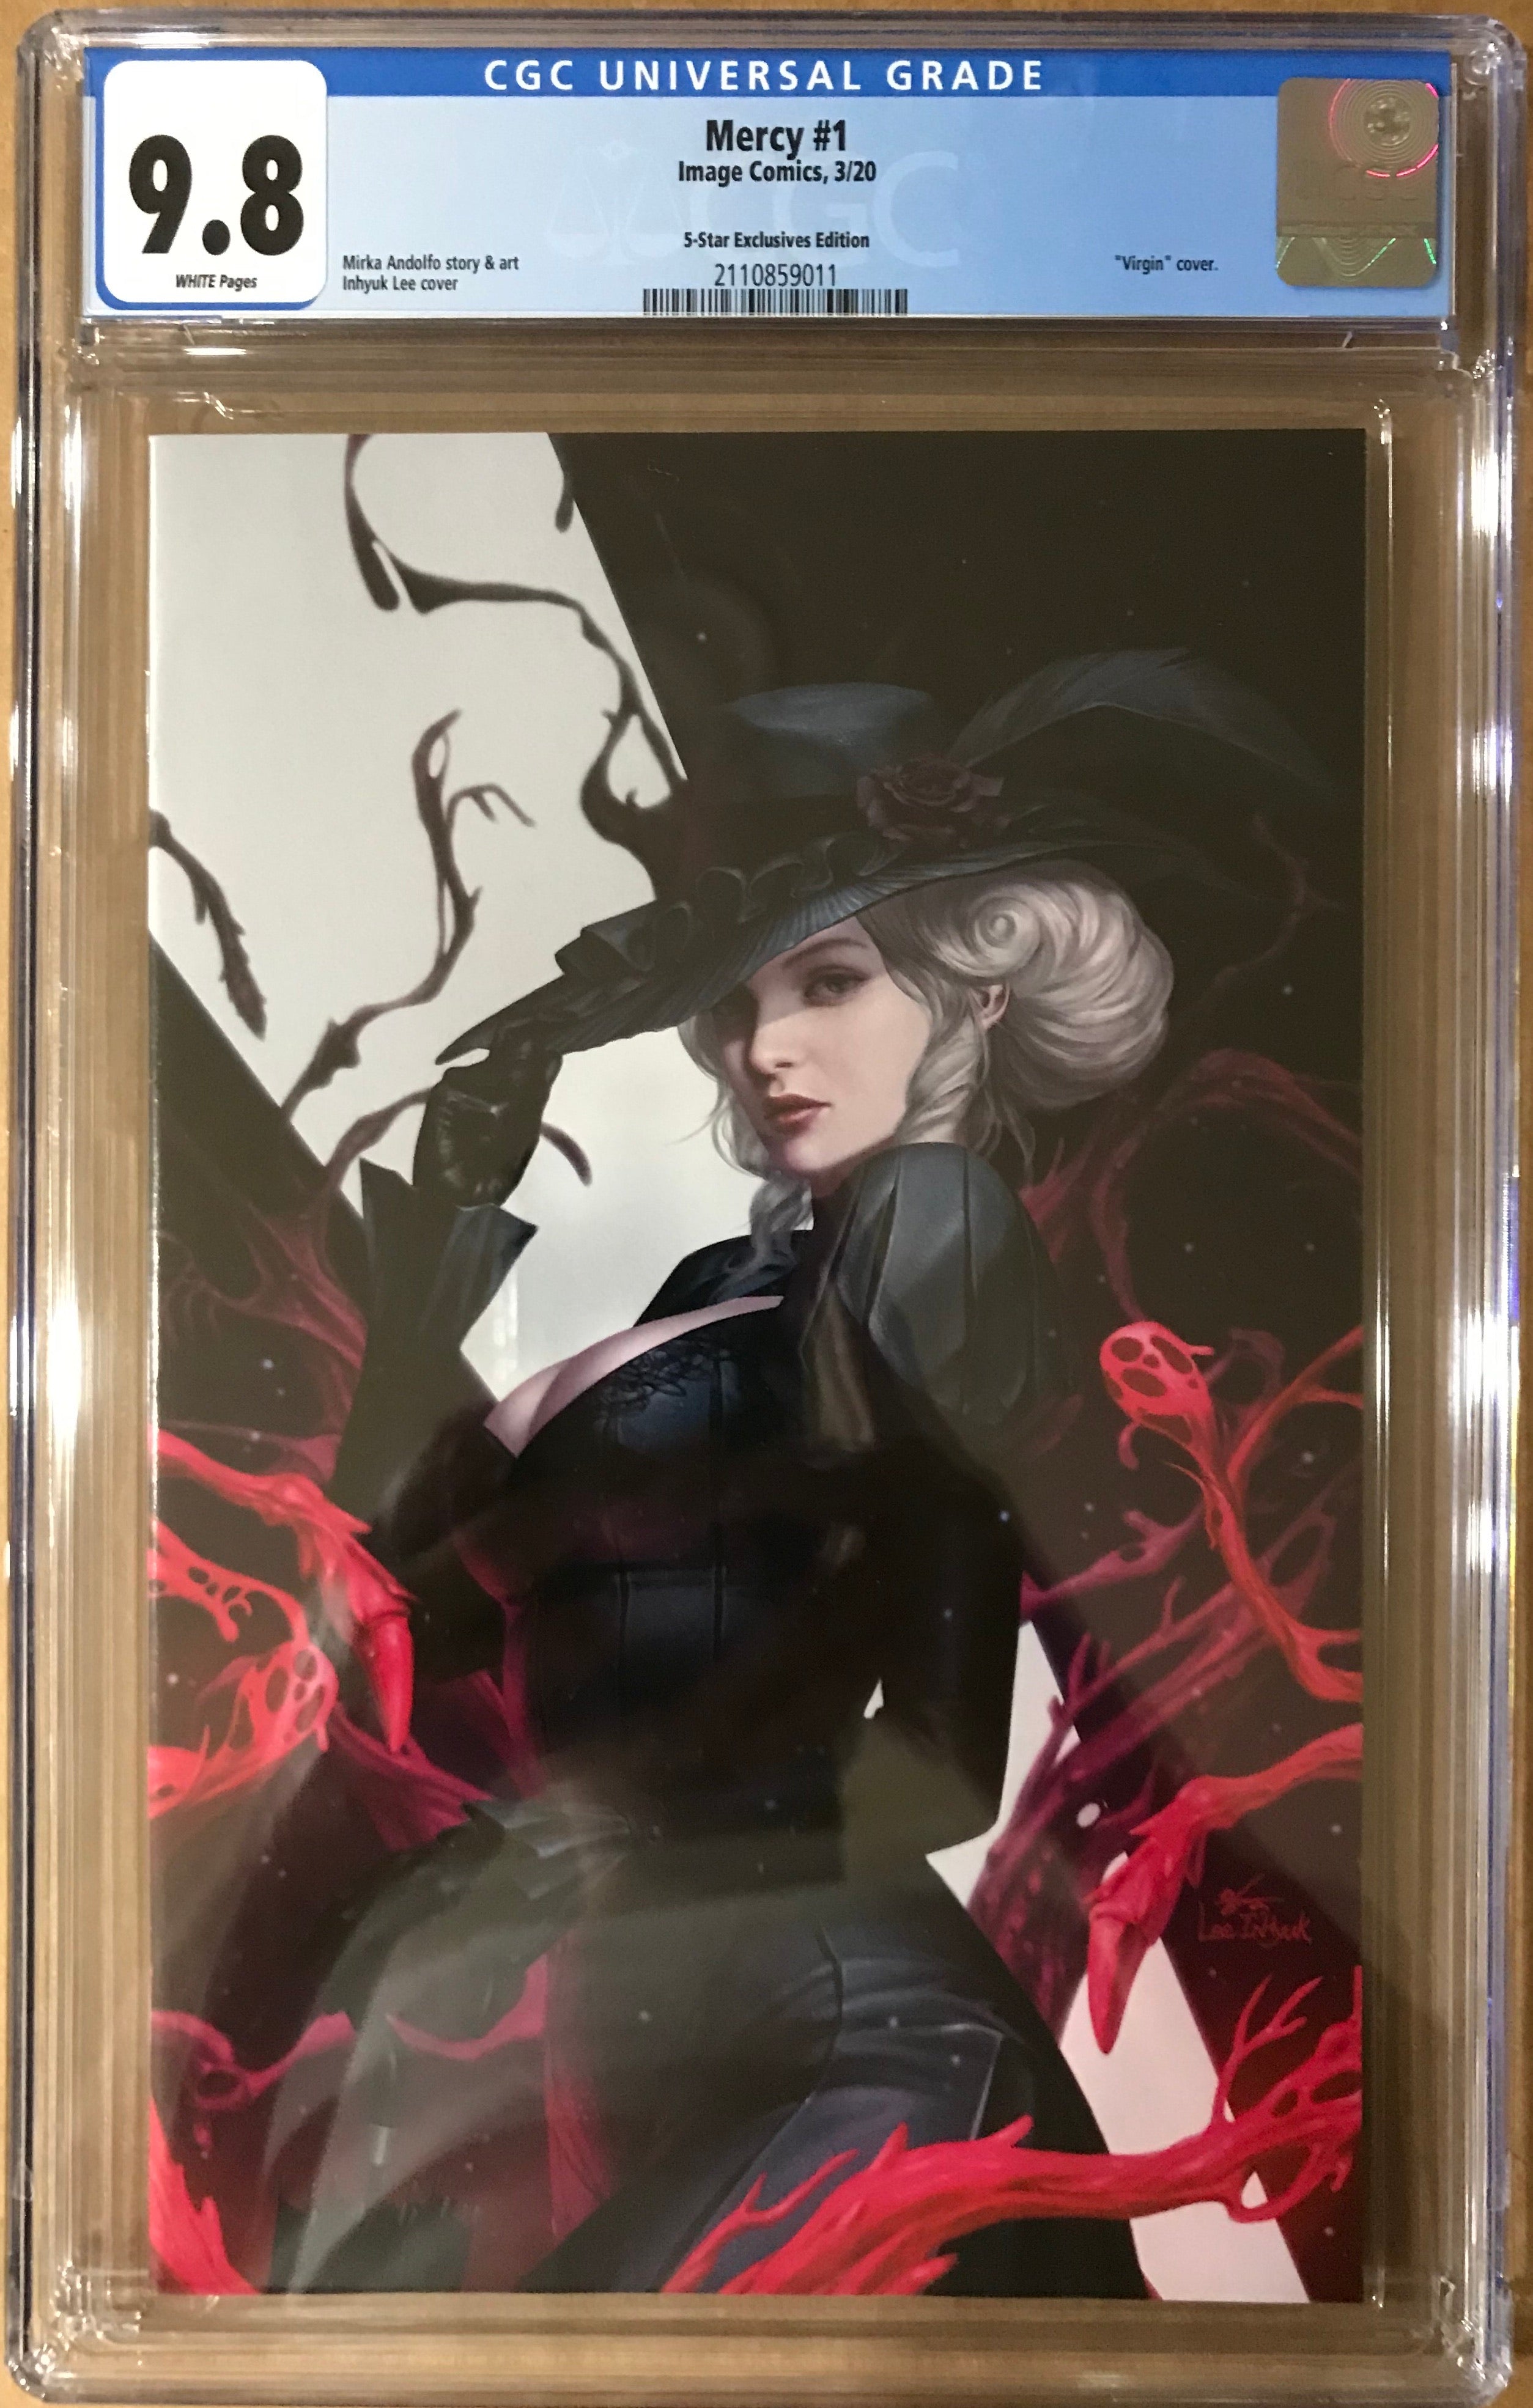 MERCY #1 INHYUK LEE EXCLUSIVE COVER RAW, CGC & SIGNED OPTIONS